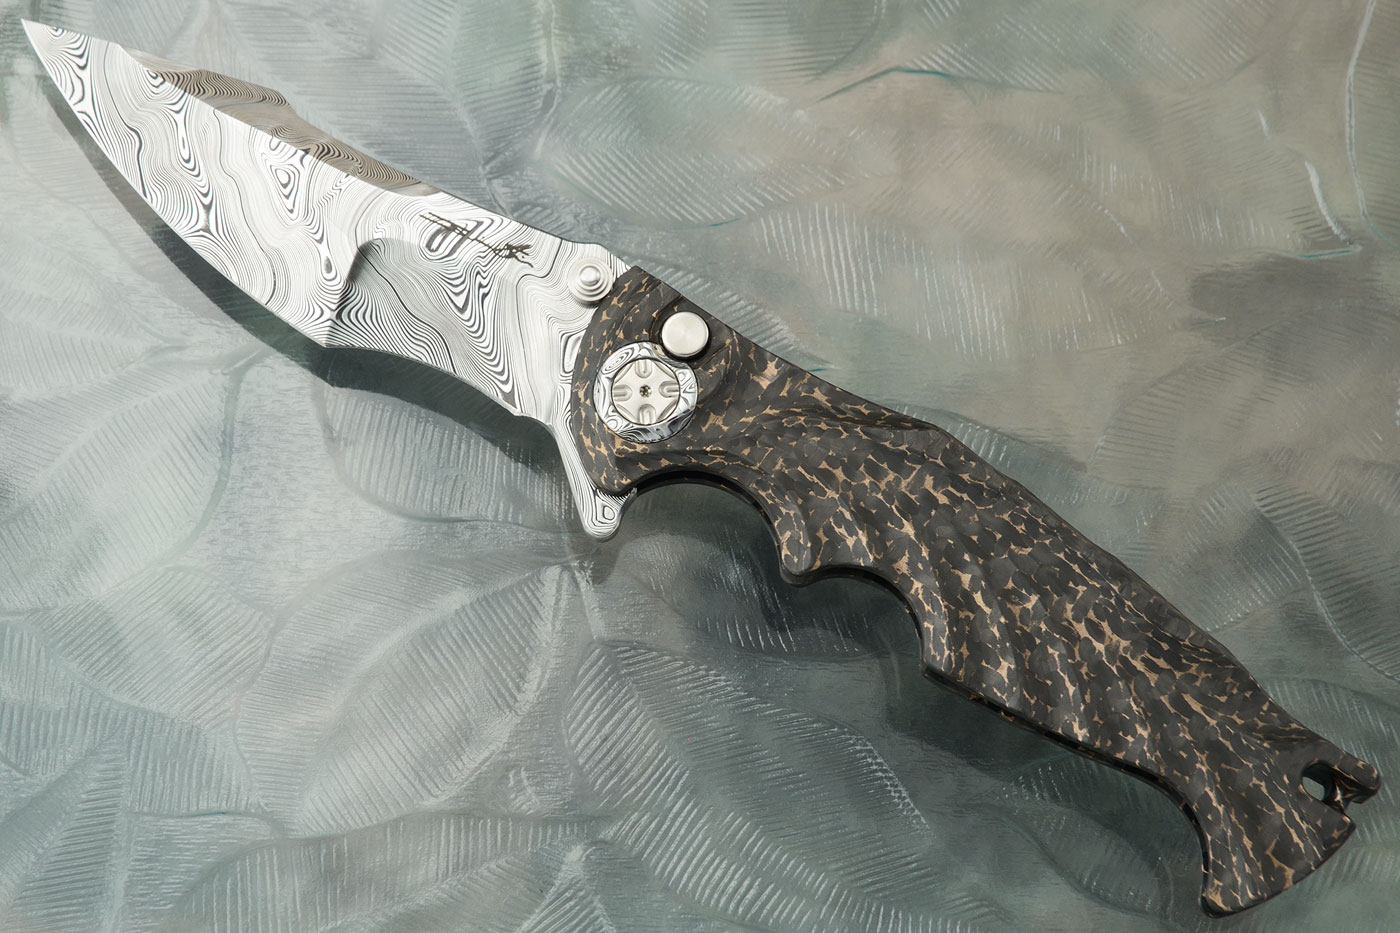 Tighe Breaker Integral with Bronze Infused Carbon Fiber and Damasteel